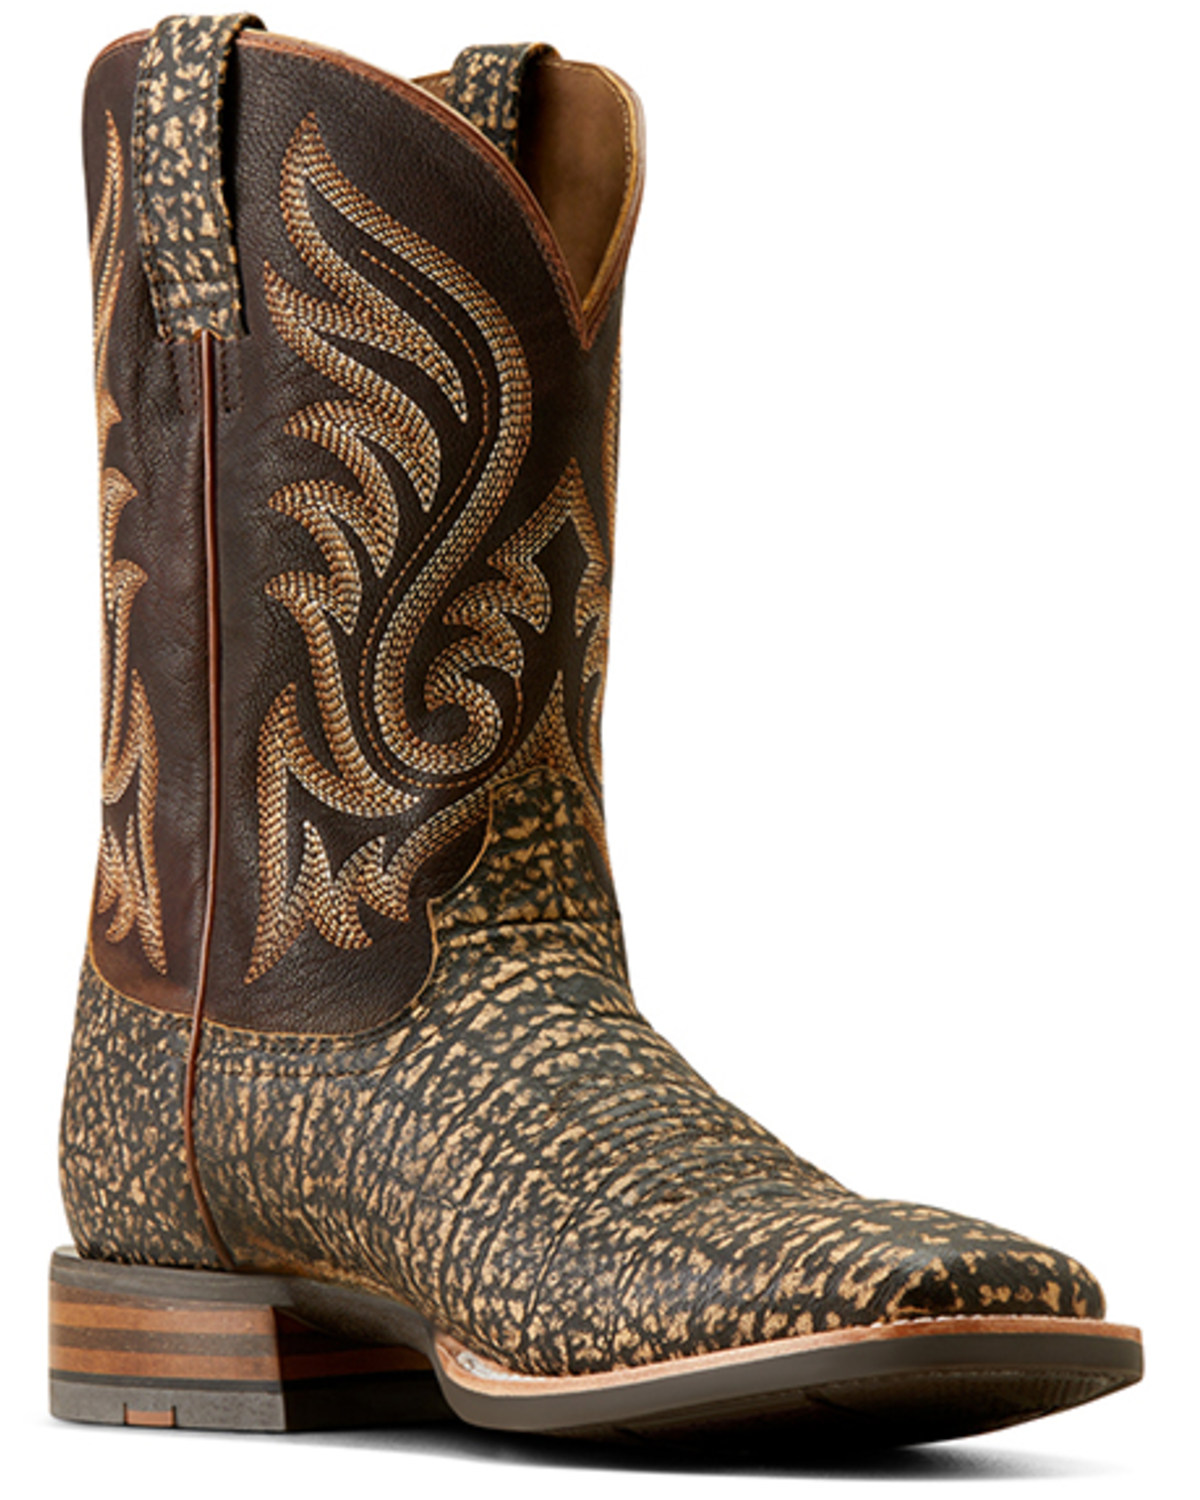 Ariat Men's Cattle Call Western Boots - Square Toe